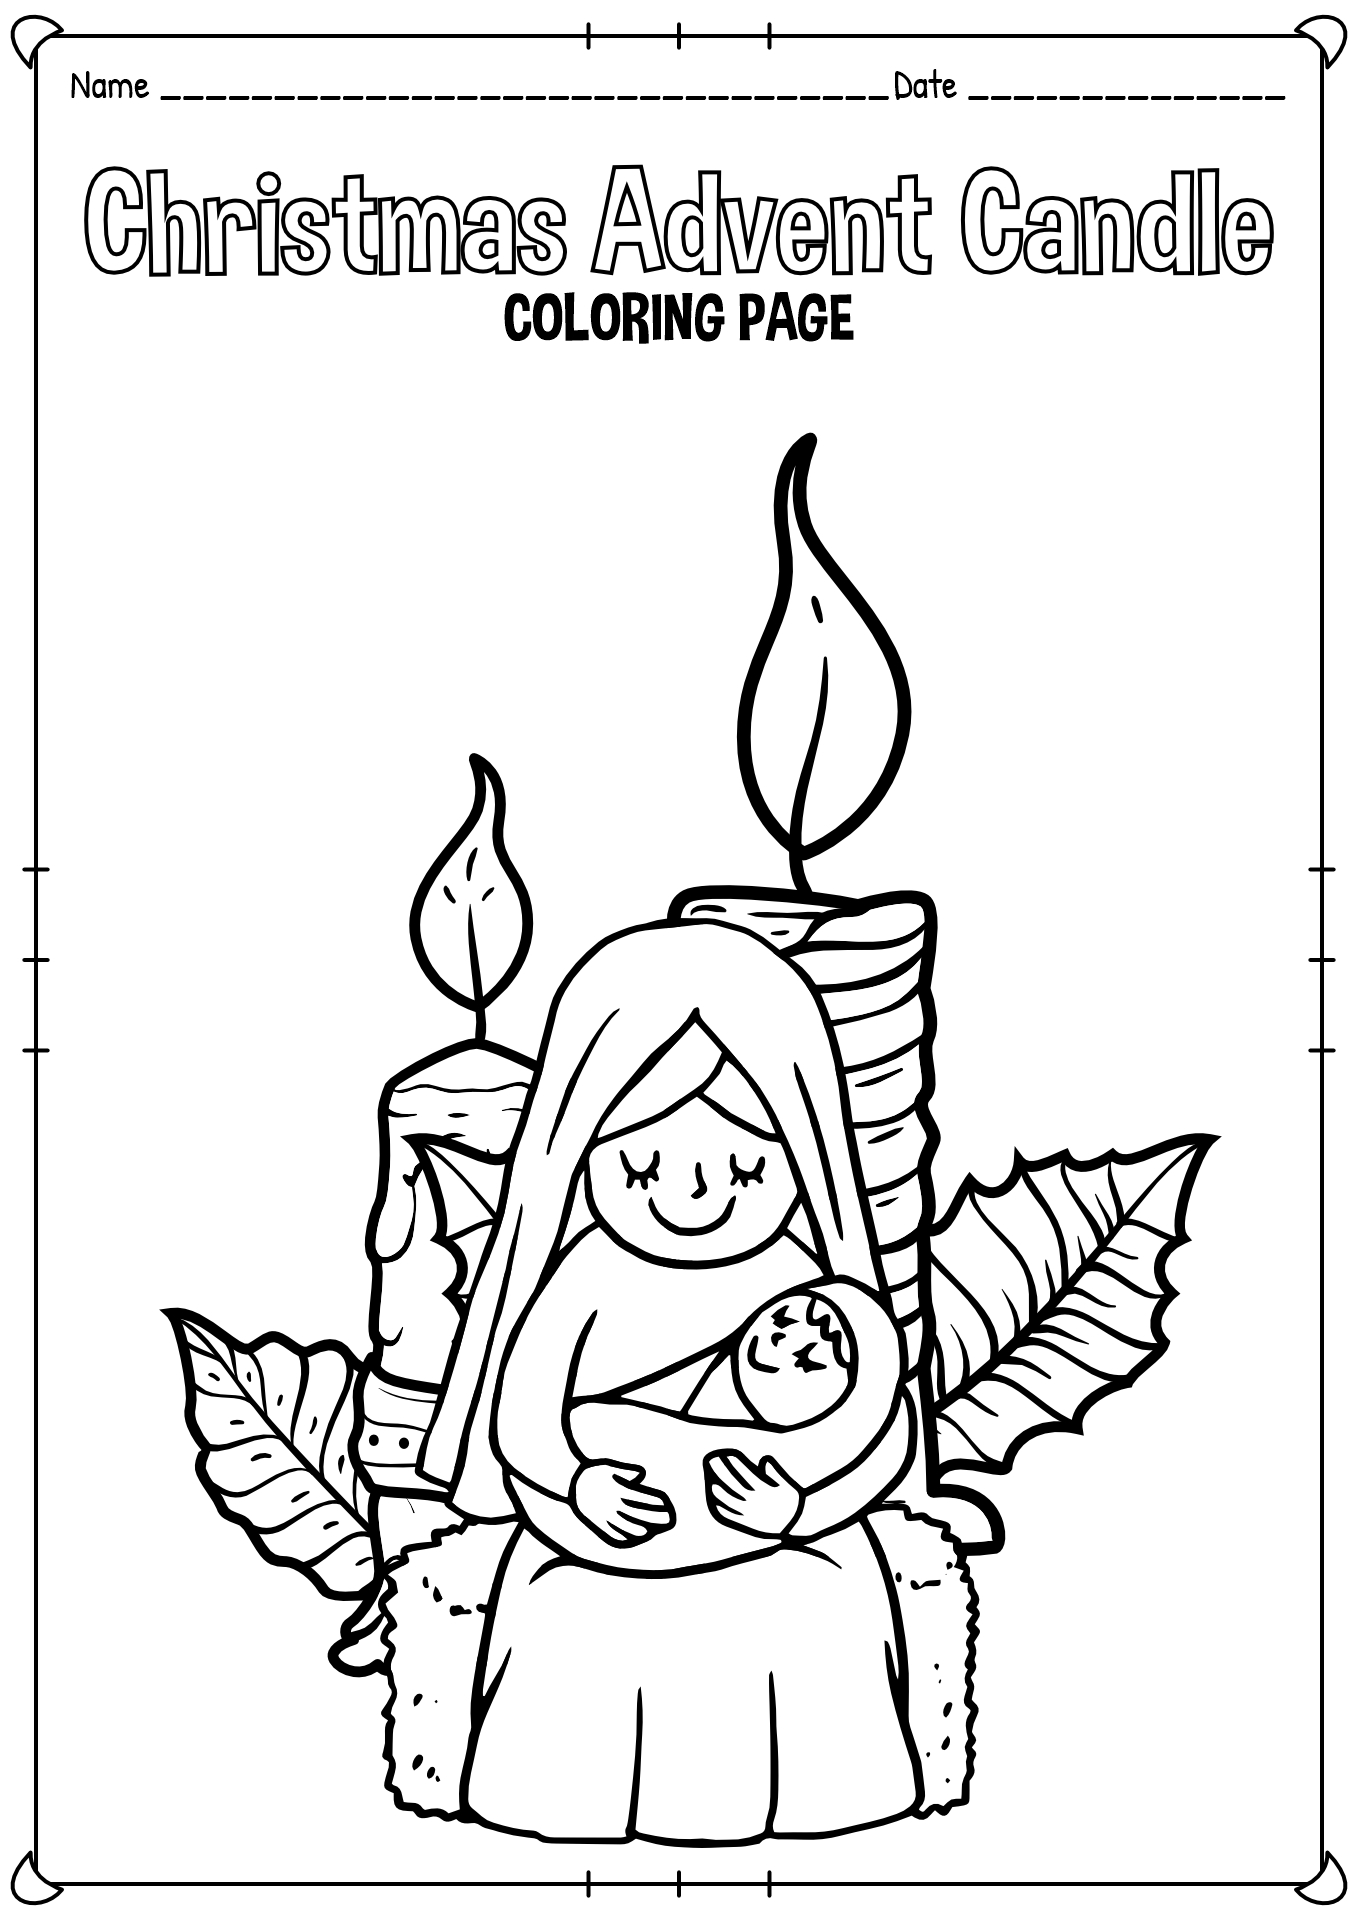 Christmas Advent Candle Coloring Page